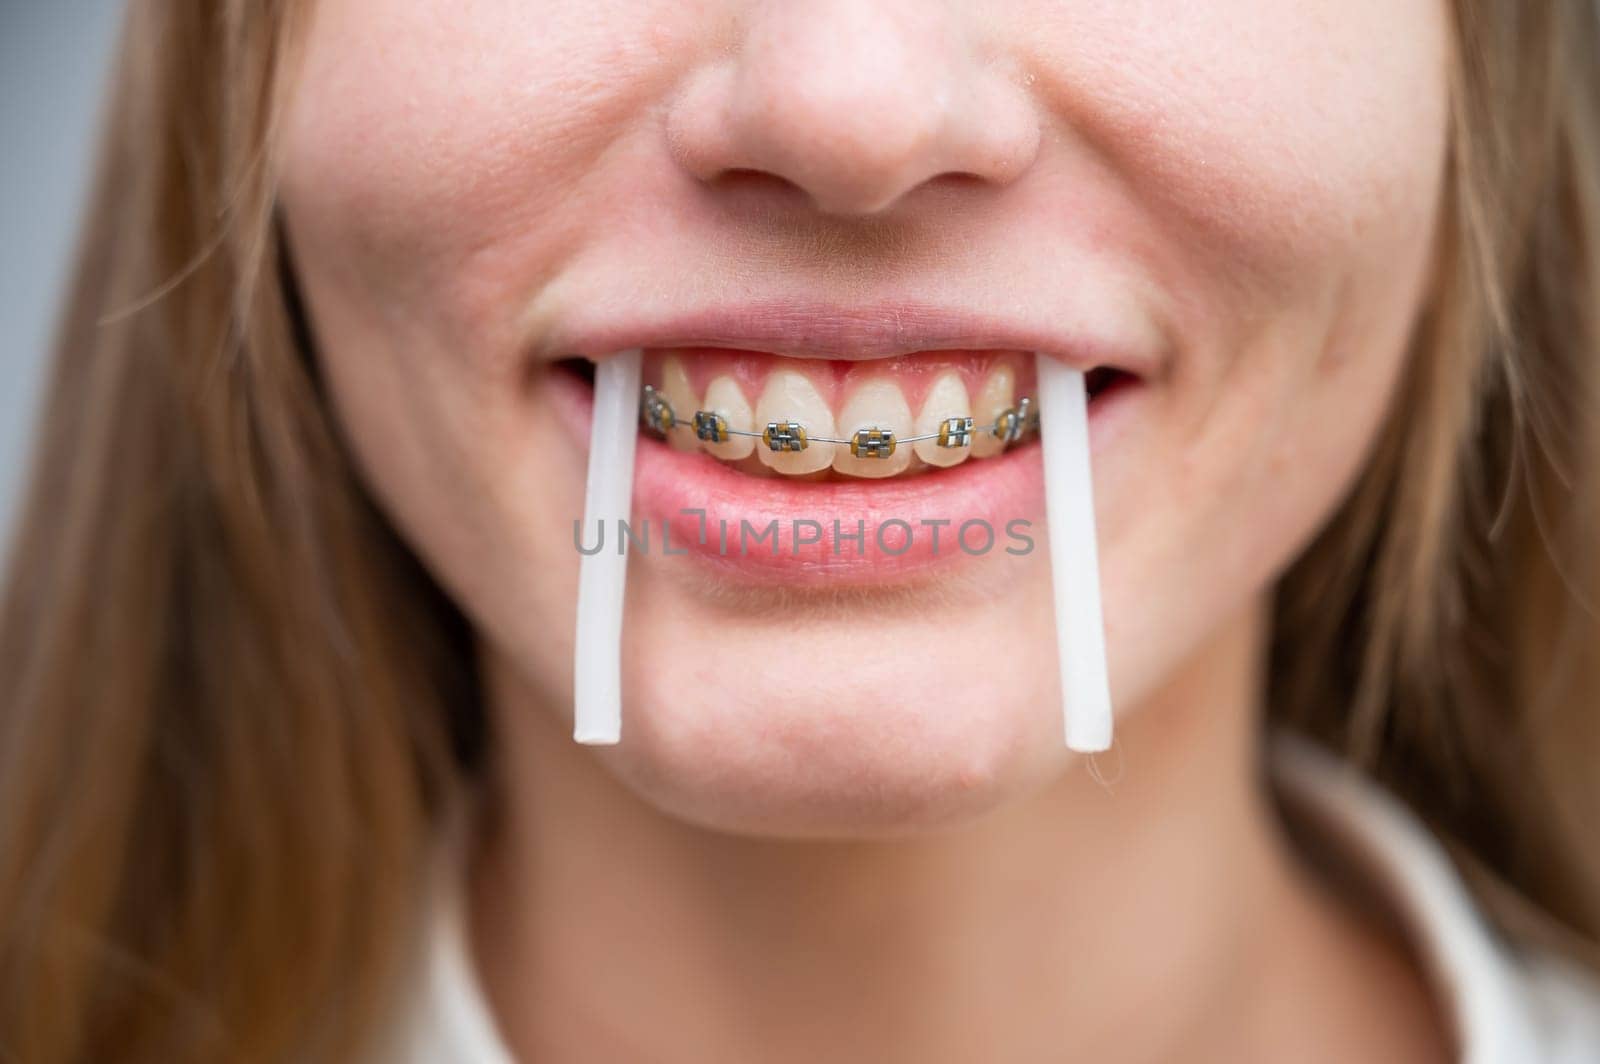 Close-up portrait of a woman with braces using special orthodontic wax. Girl fooling around pretending to be a walrus